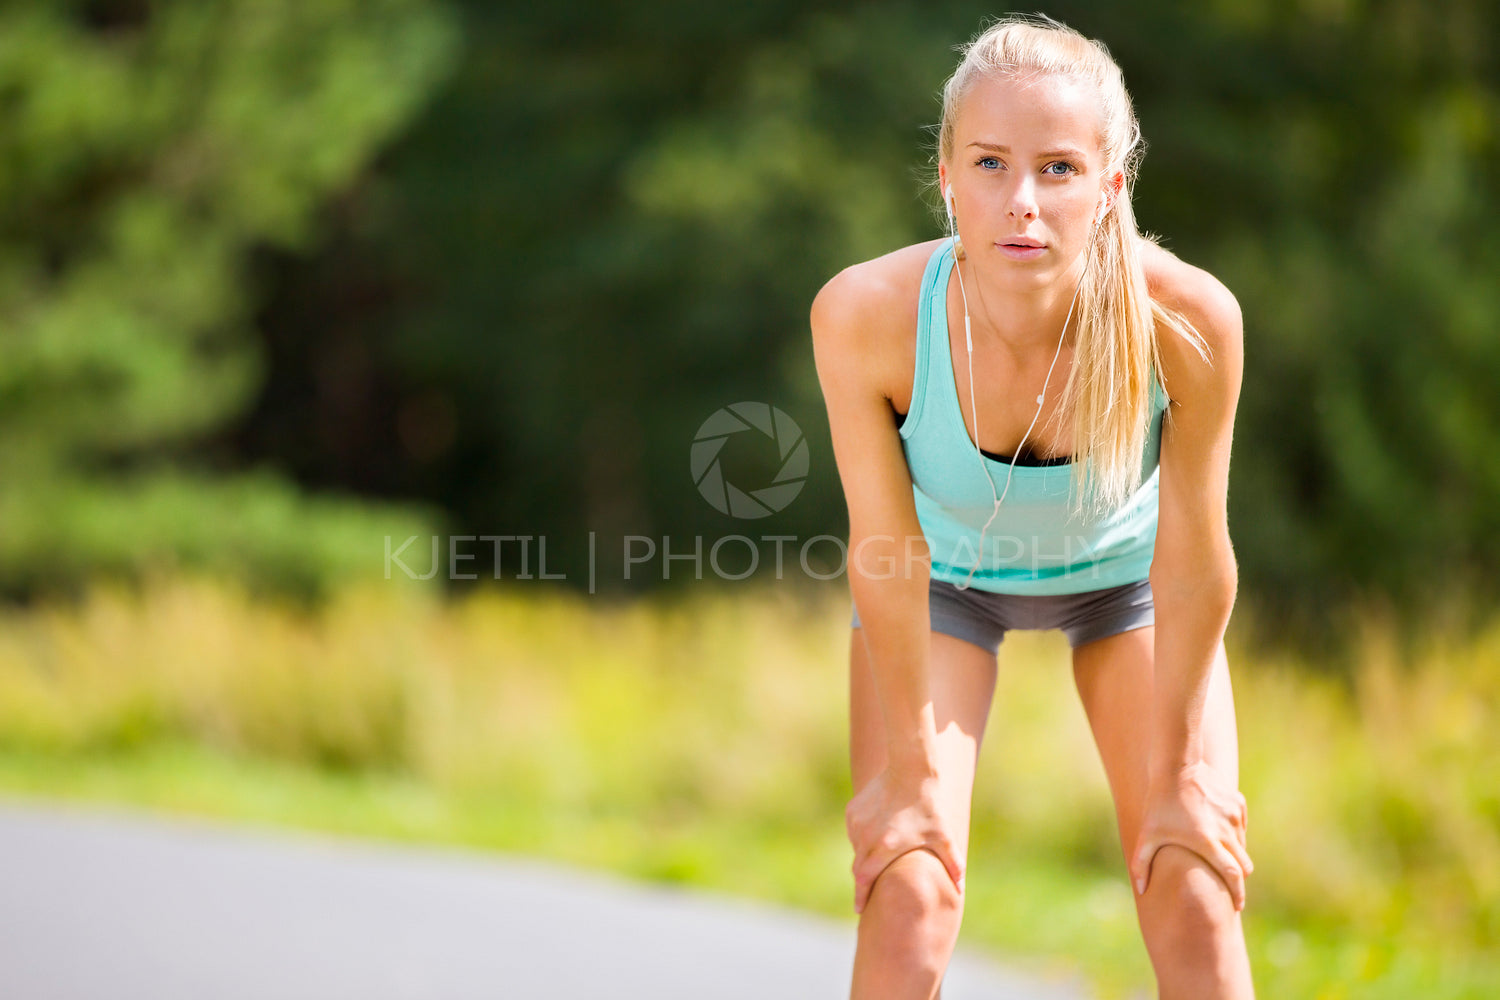 Slim young woman catching her breath after a long run